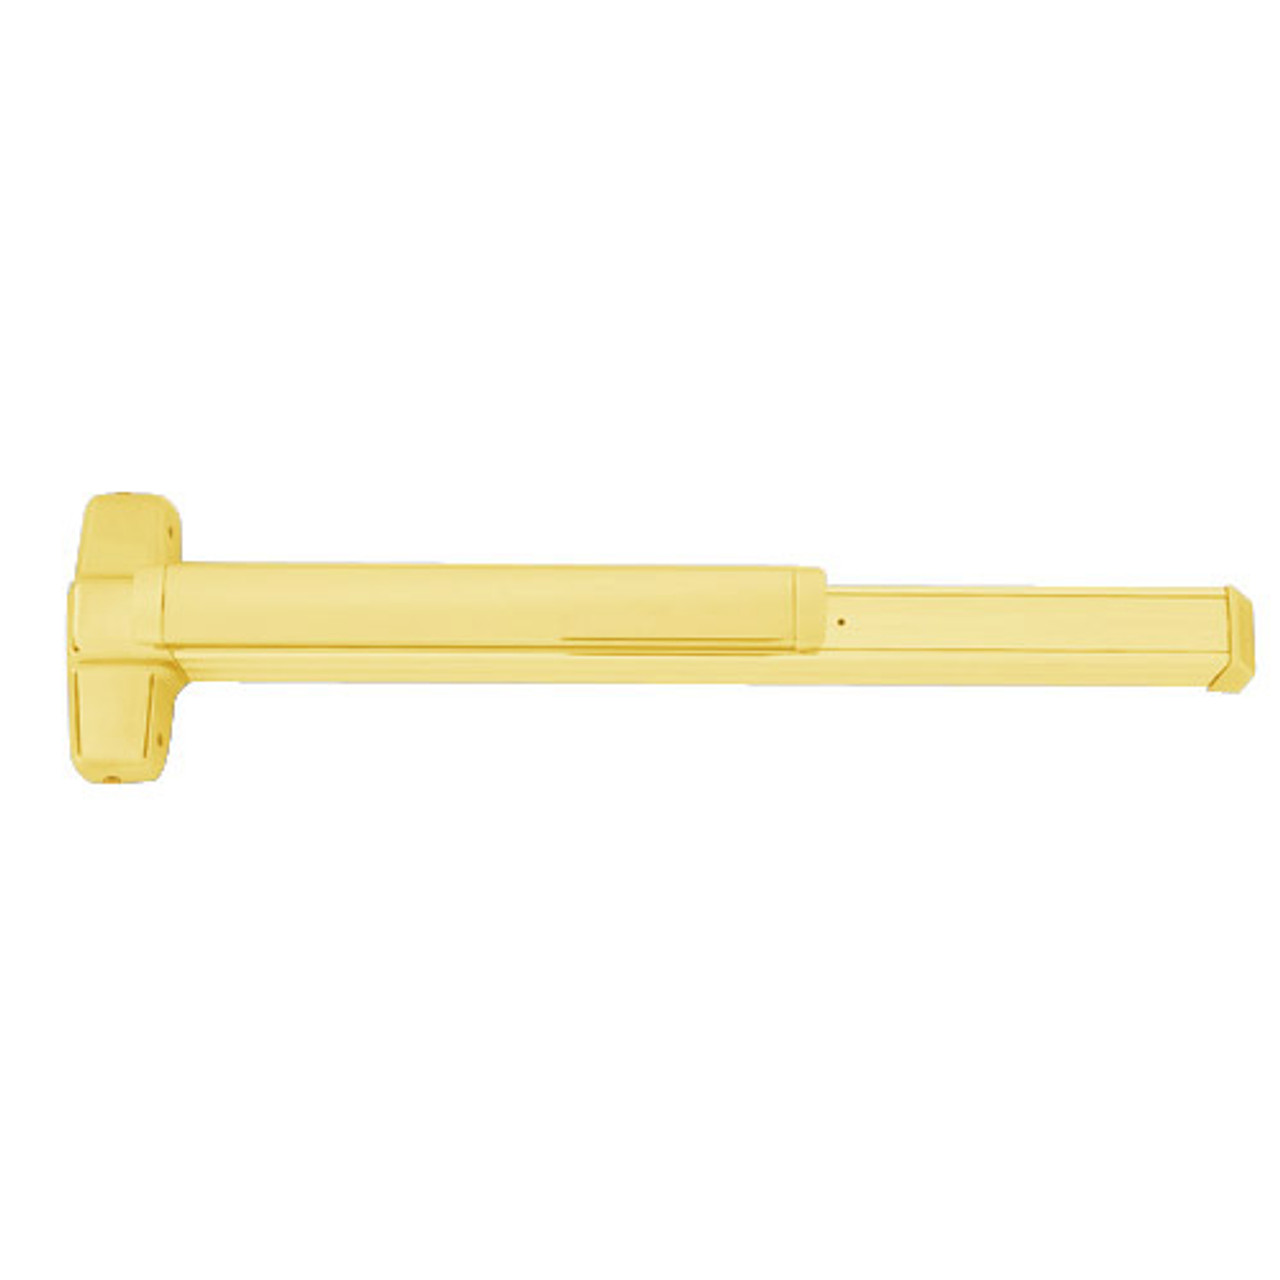 QEL9847WDC-EO-US3-3 Von Duprin Exit Device with Quiet Electric Latch in Bright Brass